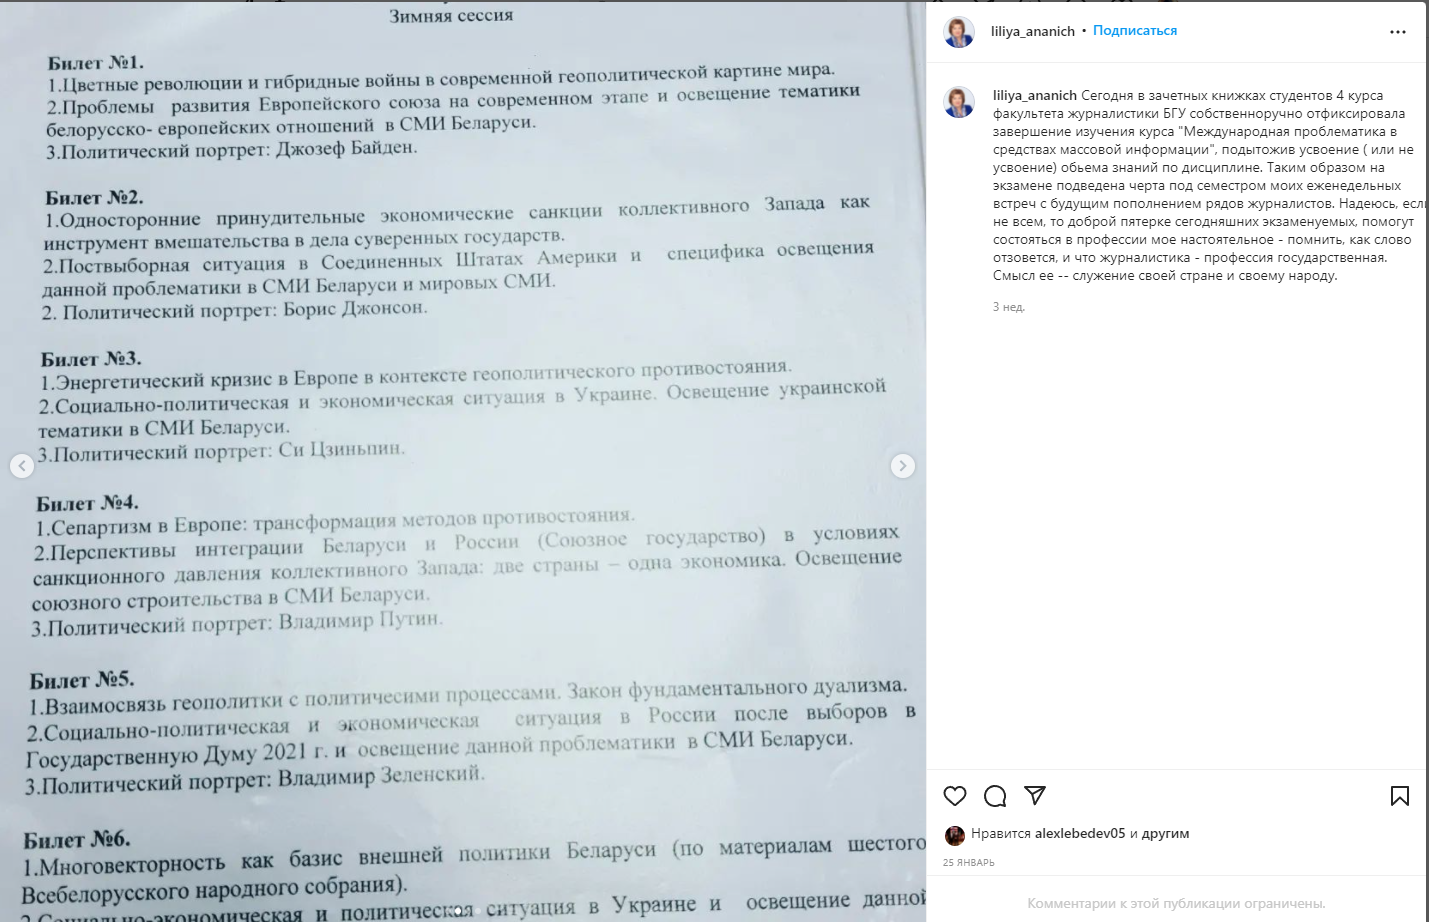 Welcome to the exam of journalism from MP and former Ministry of Information Lilia Aninich - Politics, Studies, Students, Zurfak, Journalism, Deputies, Republic of Belarus, Ideology, Niva, Exam, Longpost